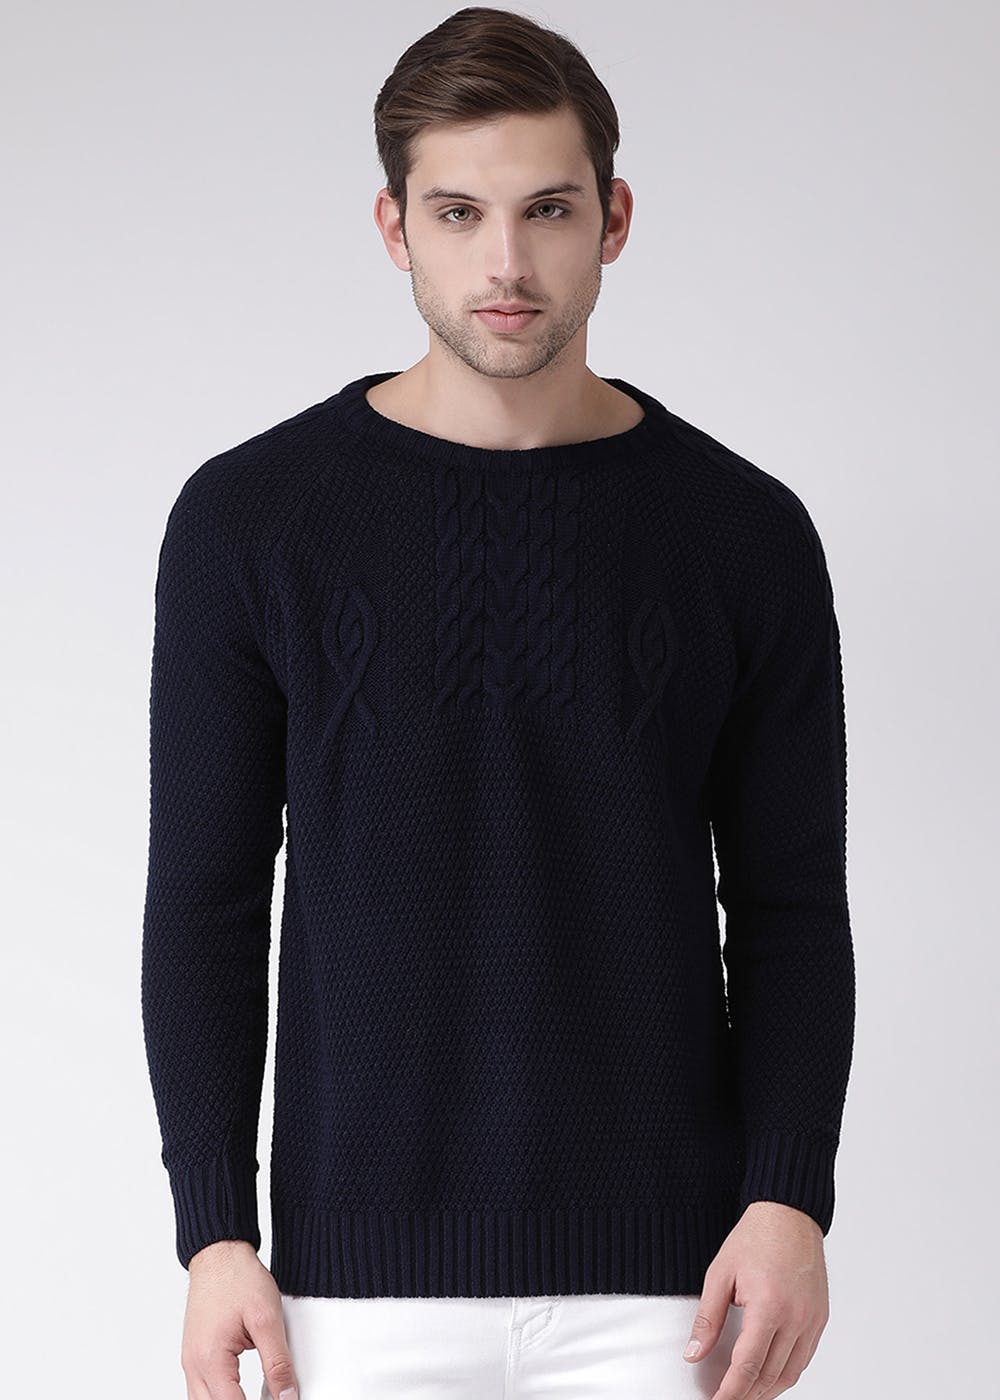 Get Cable Knit Detail Navy Sweater at ₹ 1140 | LBB Shop